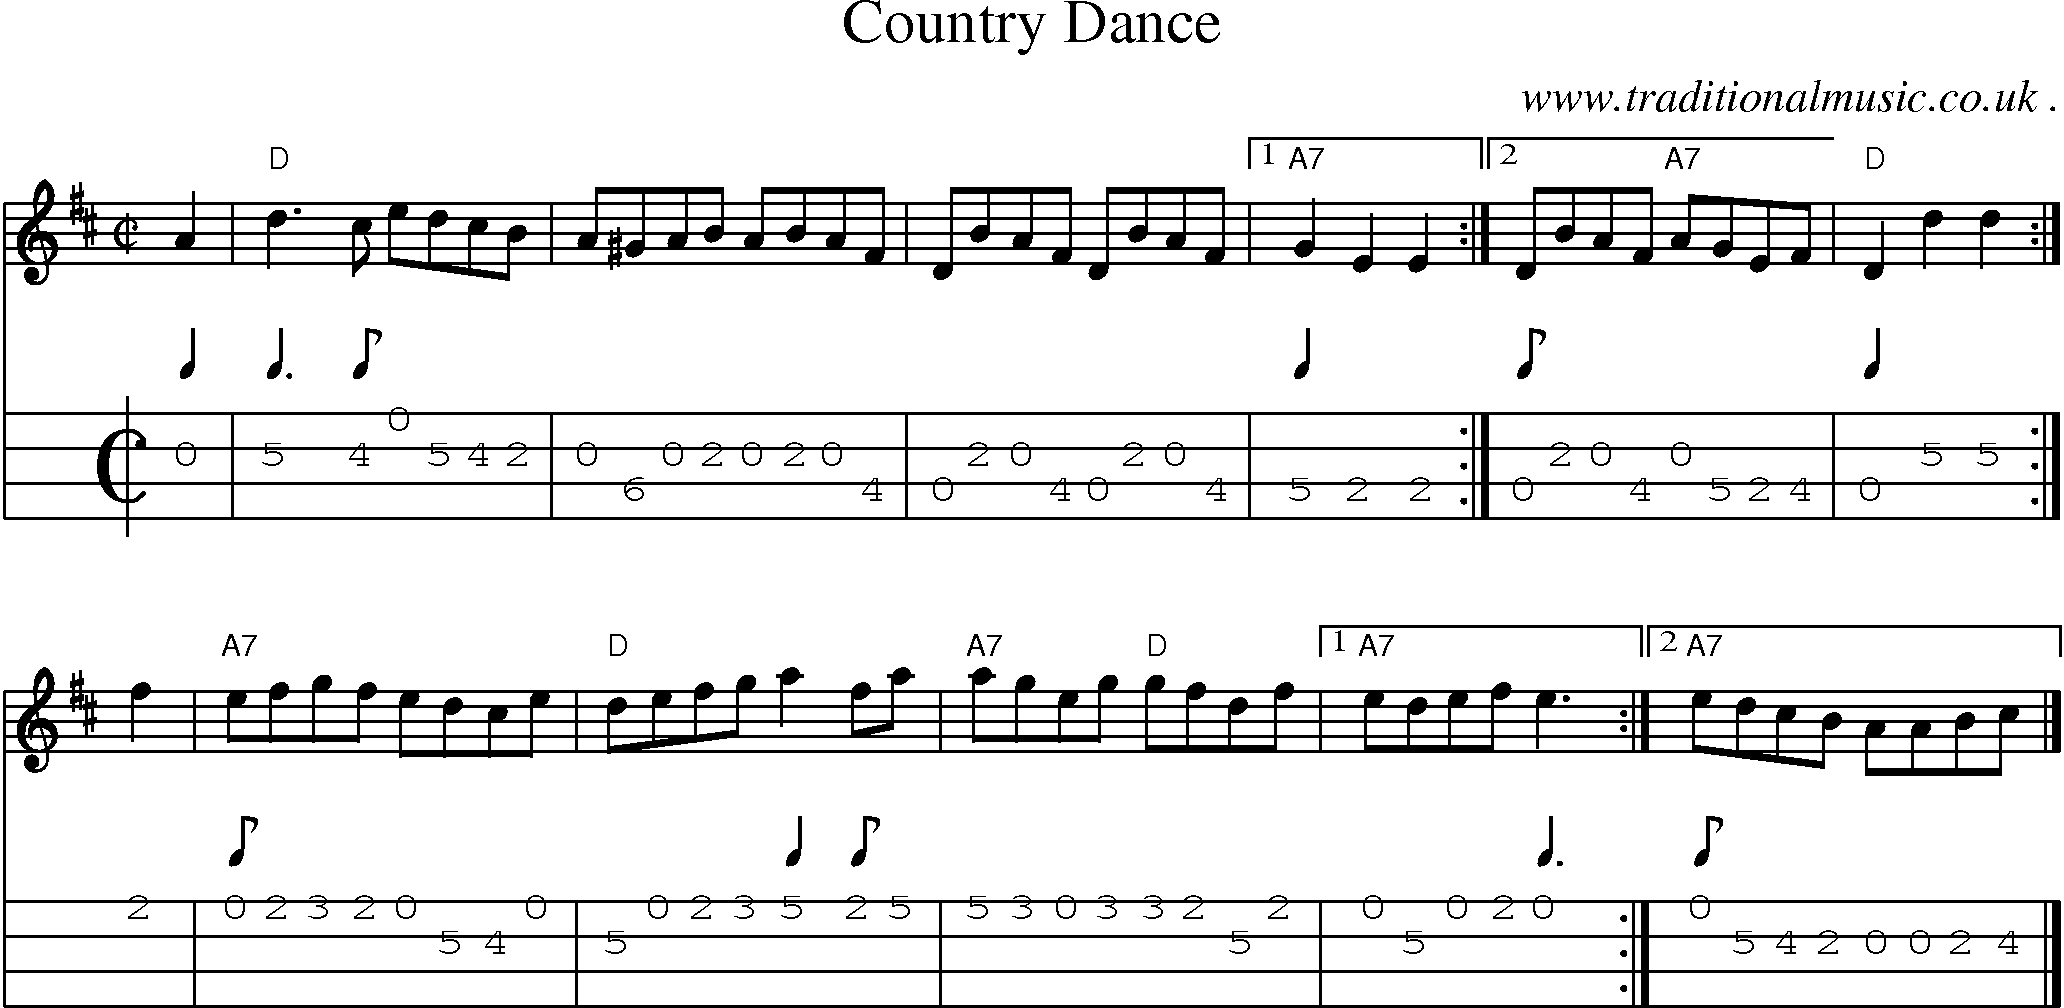 Sheet-music  score, Chords and Mandolin Tabs for Country Dance